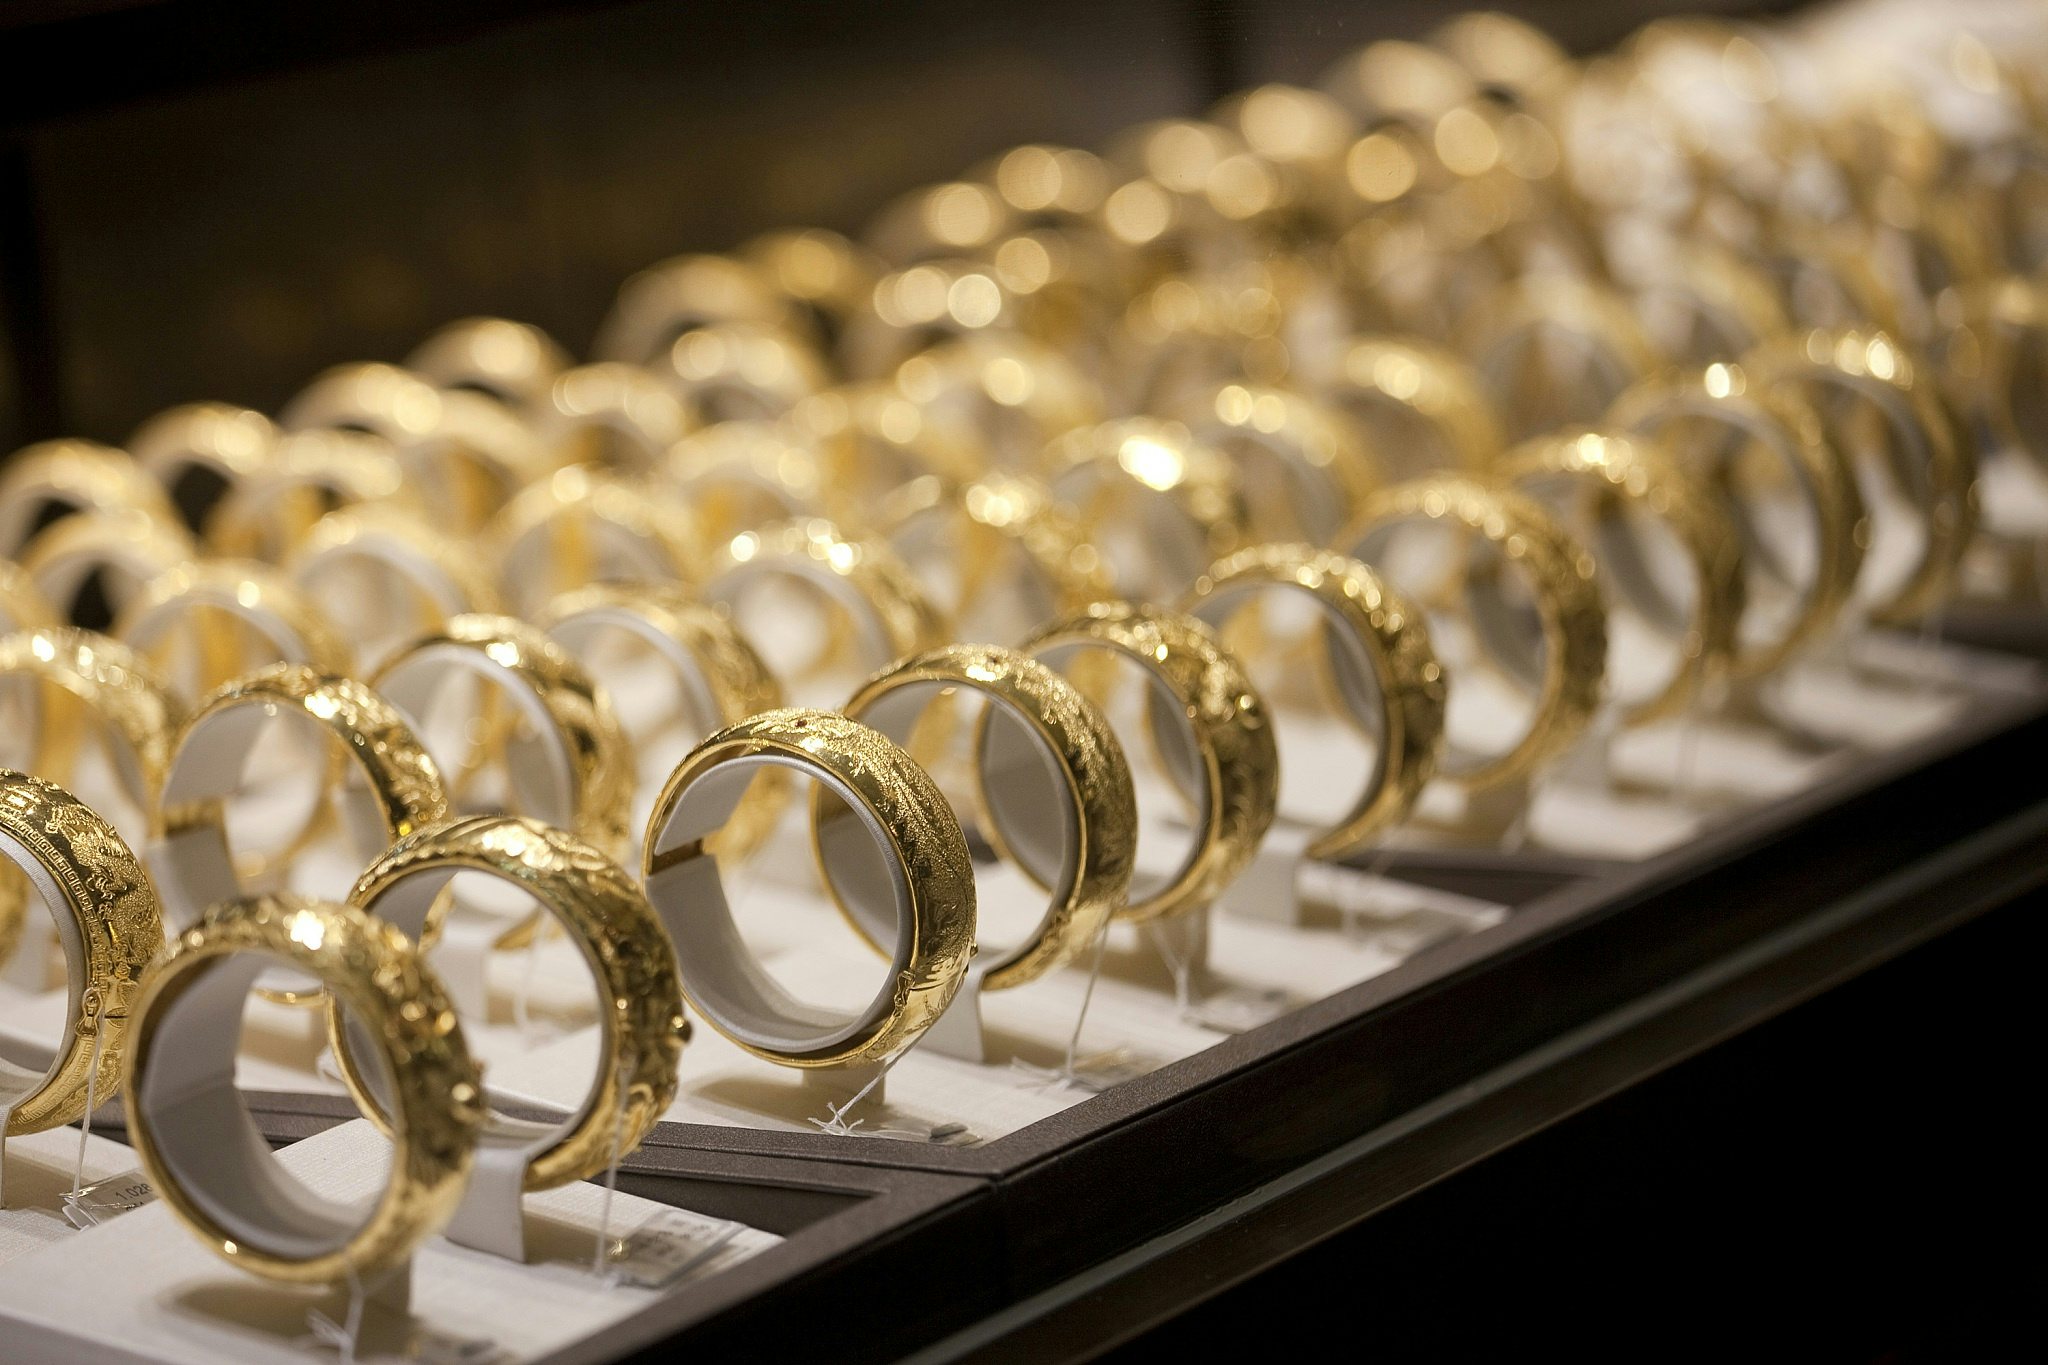 Gold bracelets for sale are displayed in a Chow Tai Fook Group jewelry store in Hong Kong, China. Photographer: Jerome Favre/Bloomberg